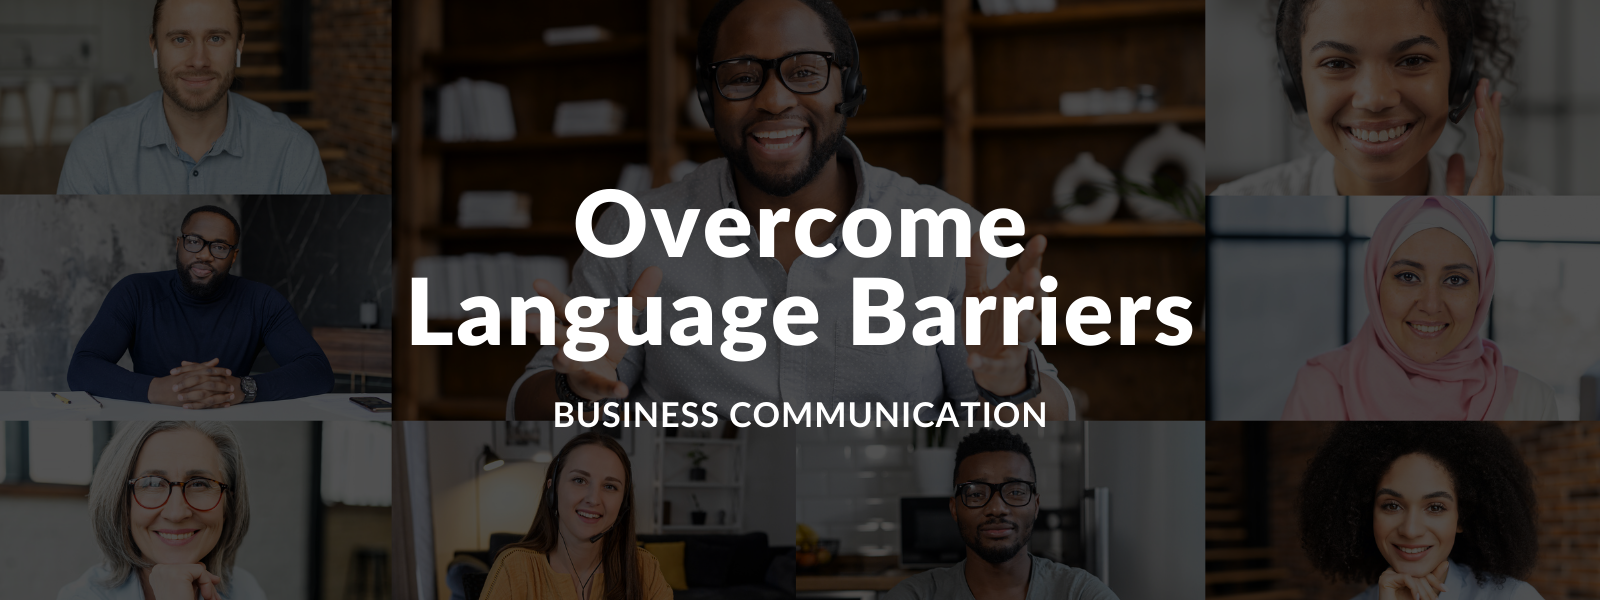 How To Overcome The Top 4 Communication Barriers In The Workplace